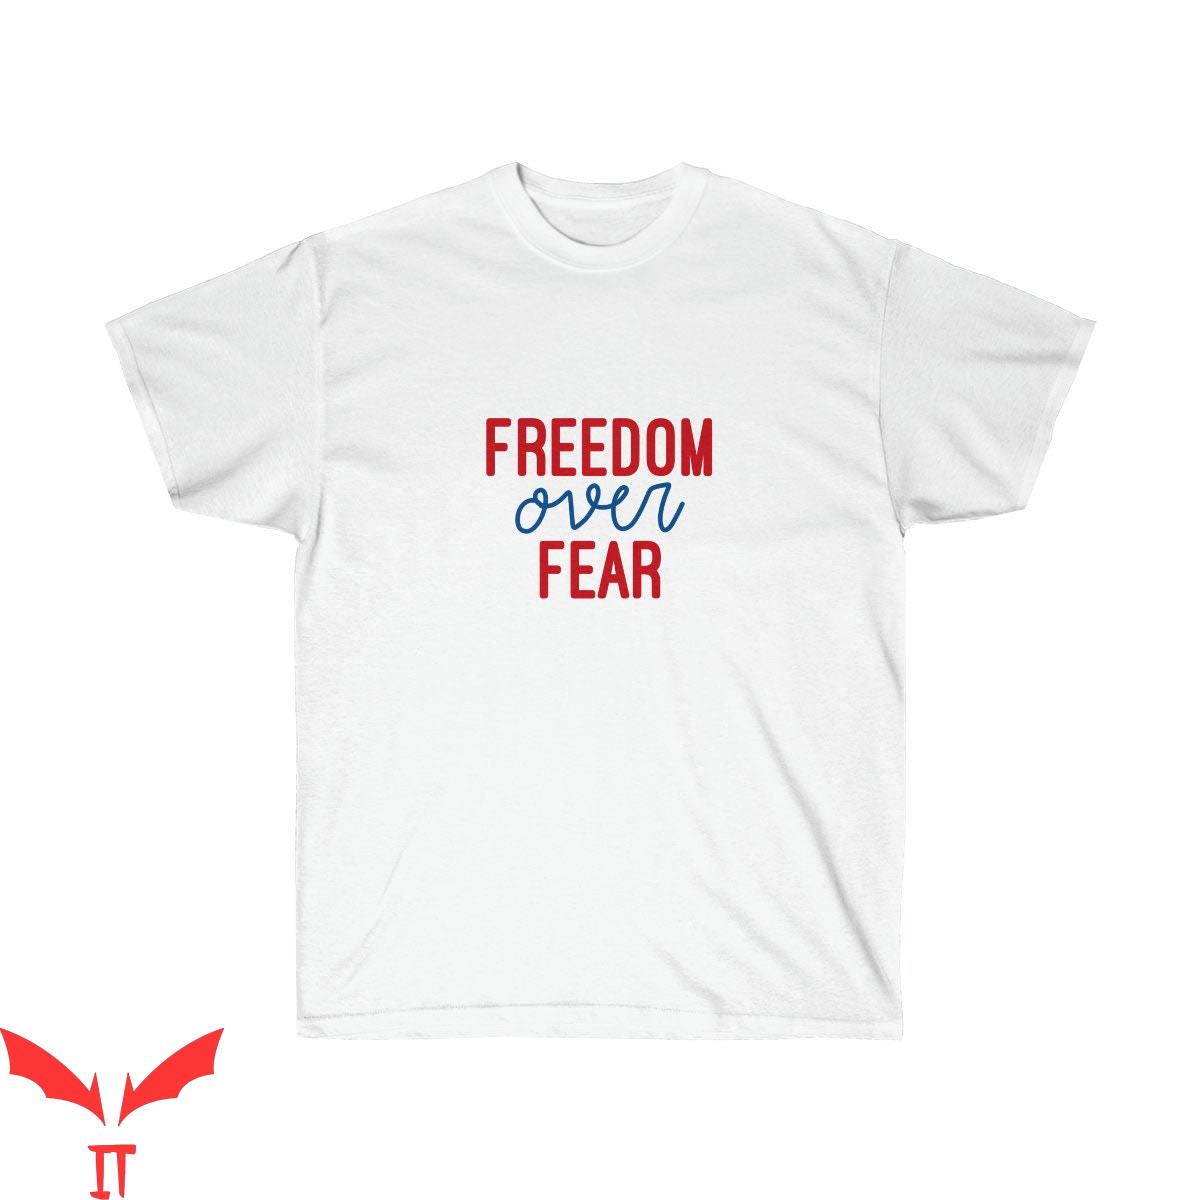 Freedom Over Fear T-Shirt Funny Graphic Trendy Design Tee